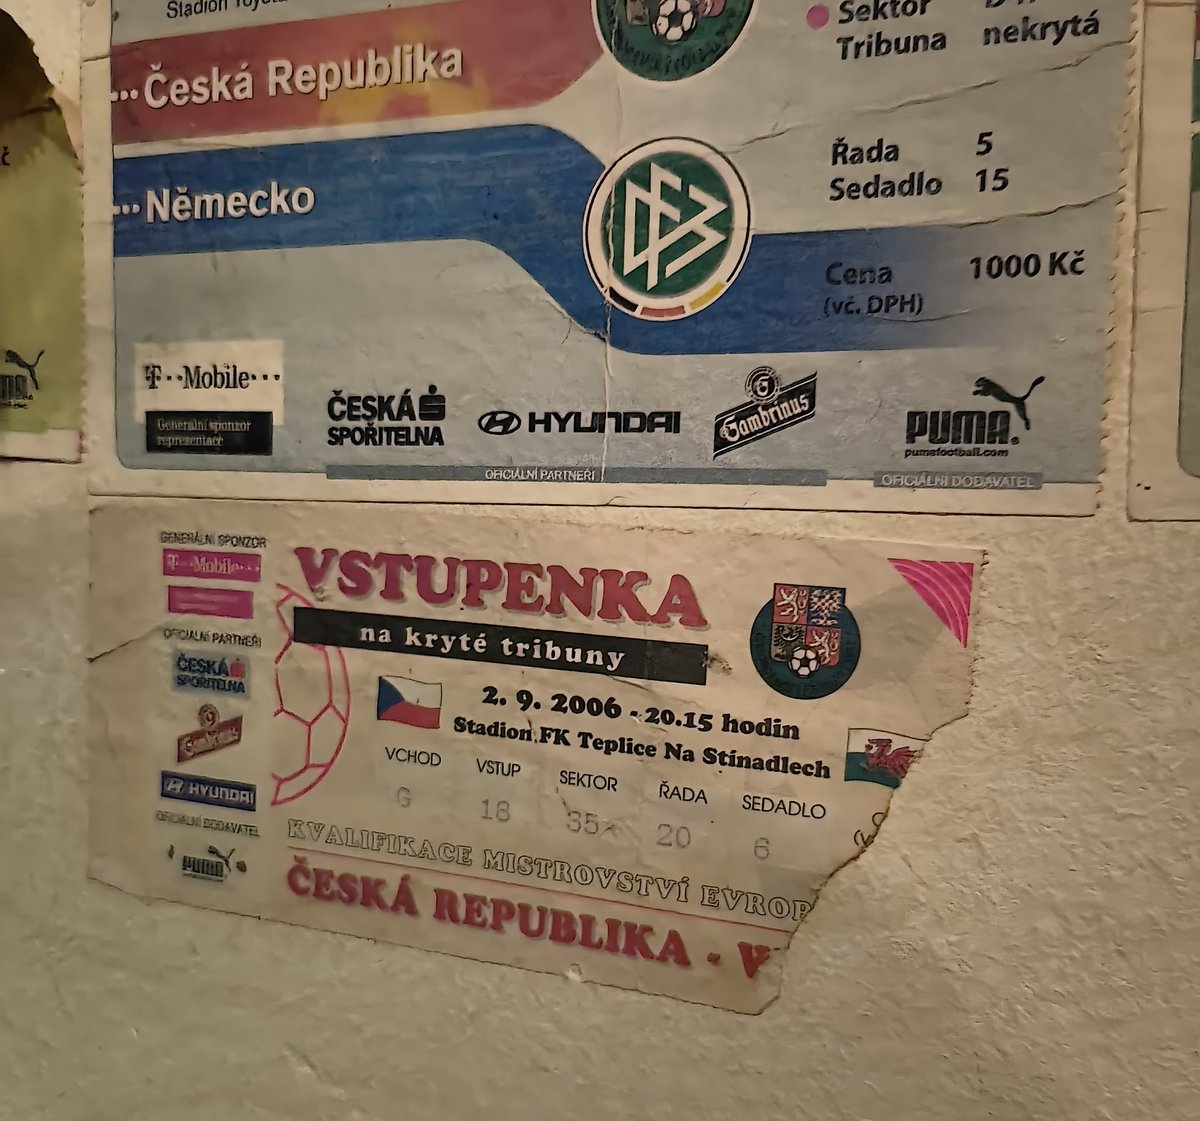 Saw this on the wall in a pub in Brno. Quite a few #walesaway there that day.